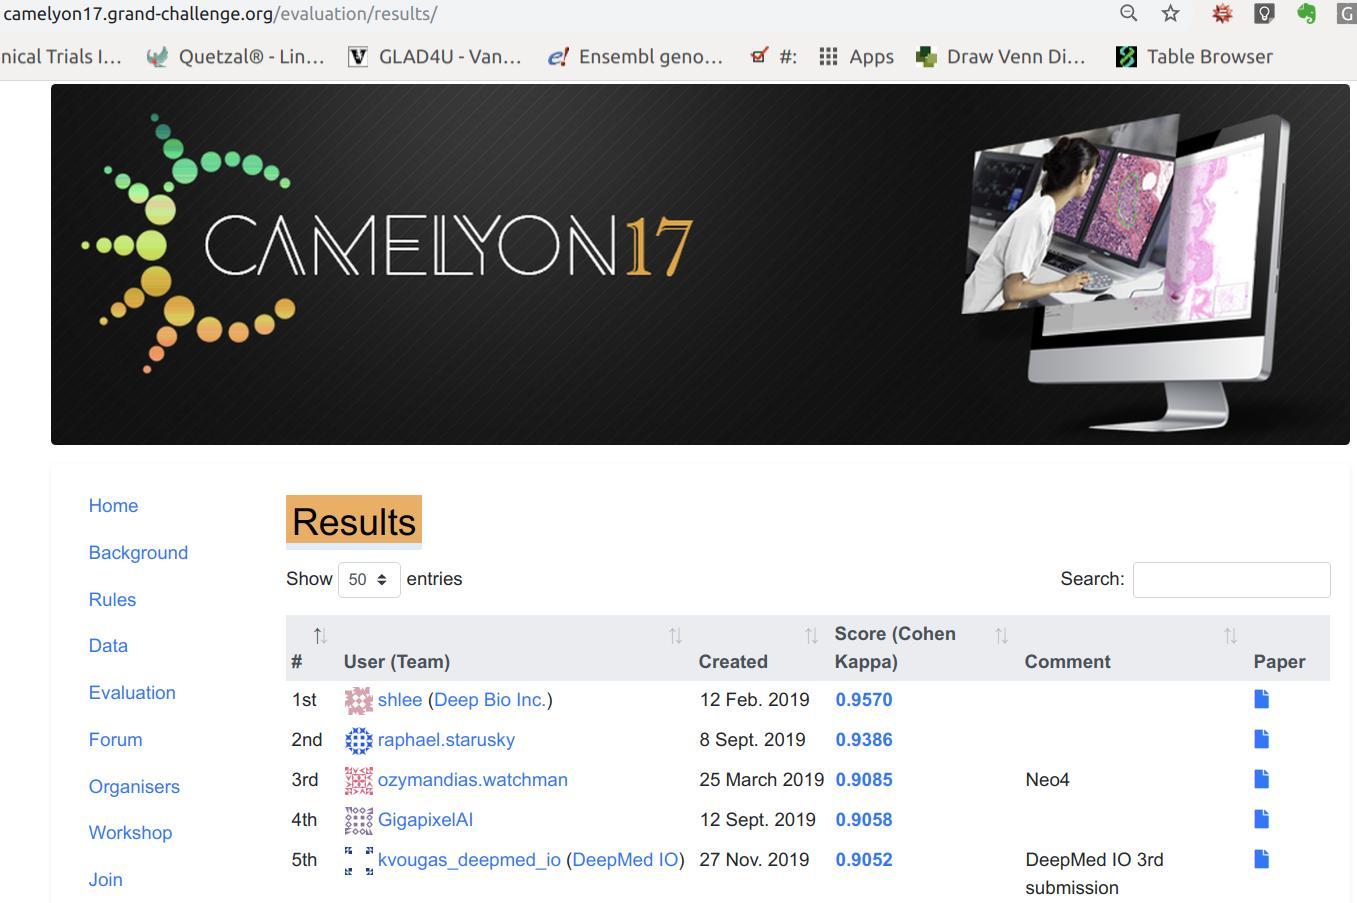 Product We are extremely exited because on November 27, 2019 our team made its 3rd submission to the #camelyon17 Grand Challenge achieving a k of 90.52%! - DeepMed I/O image